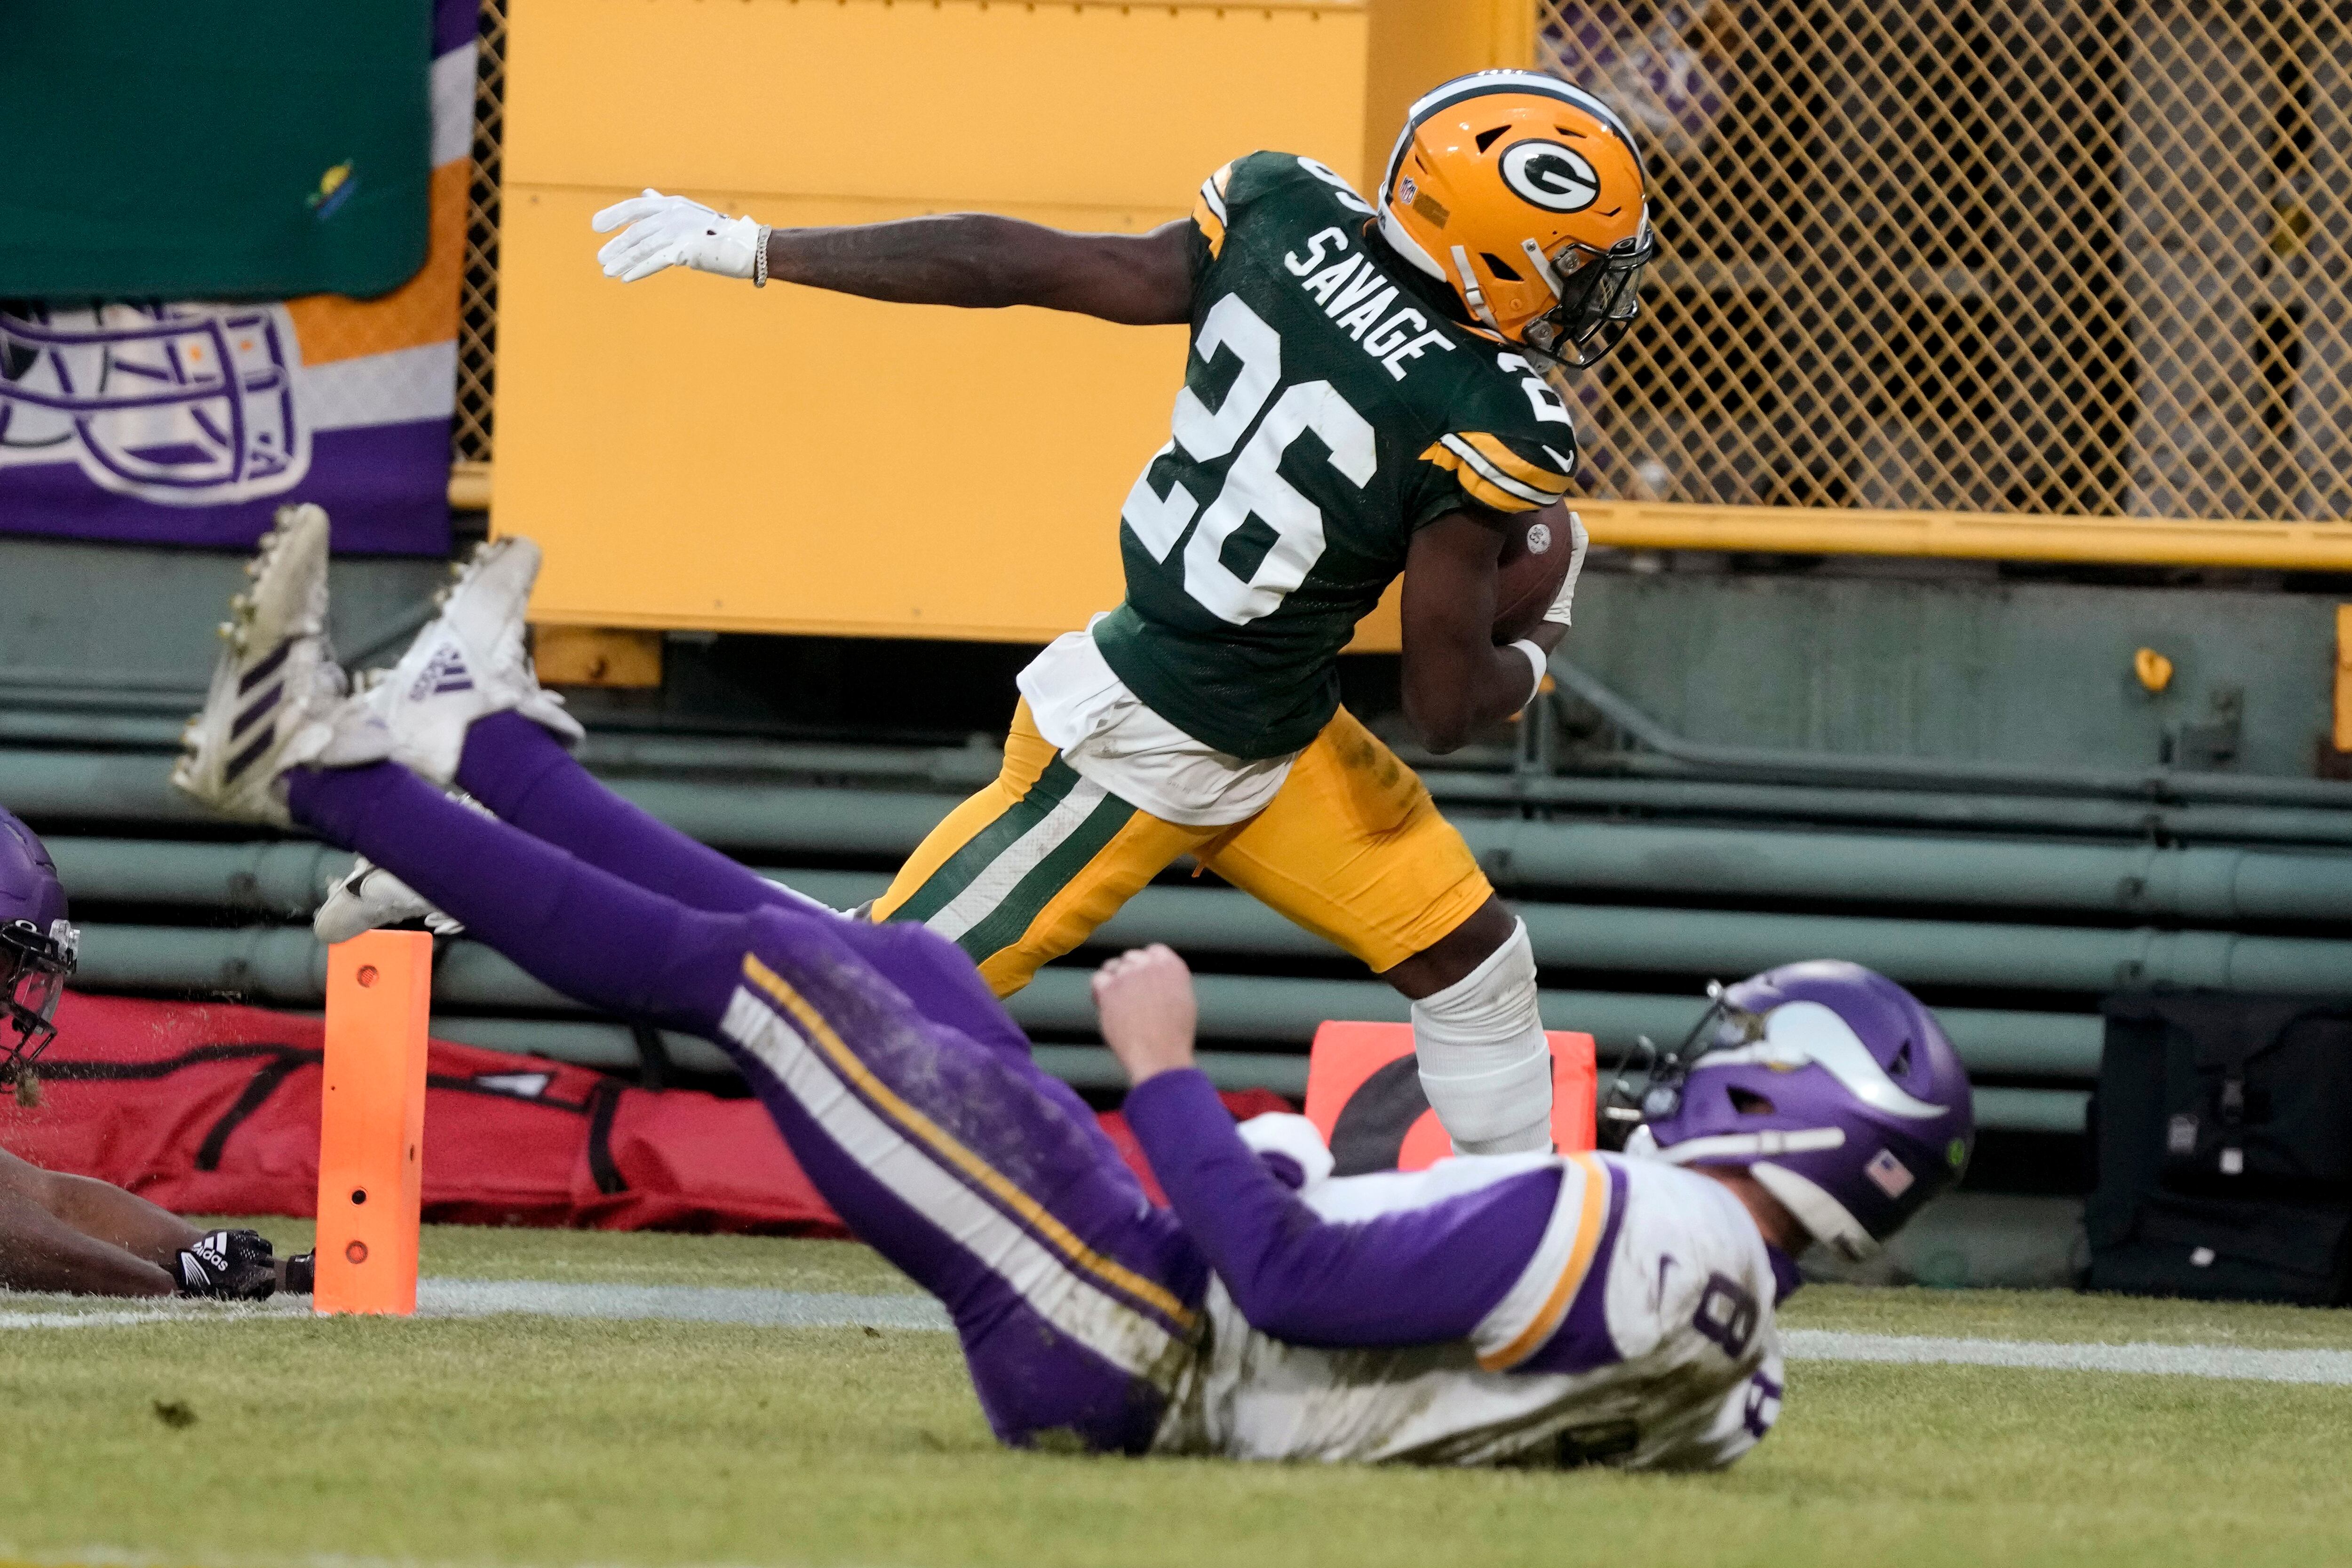 Rodgers, Packers rout Vikings 41-17, control playoff fate